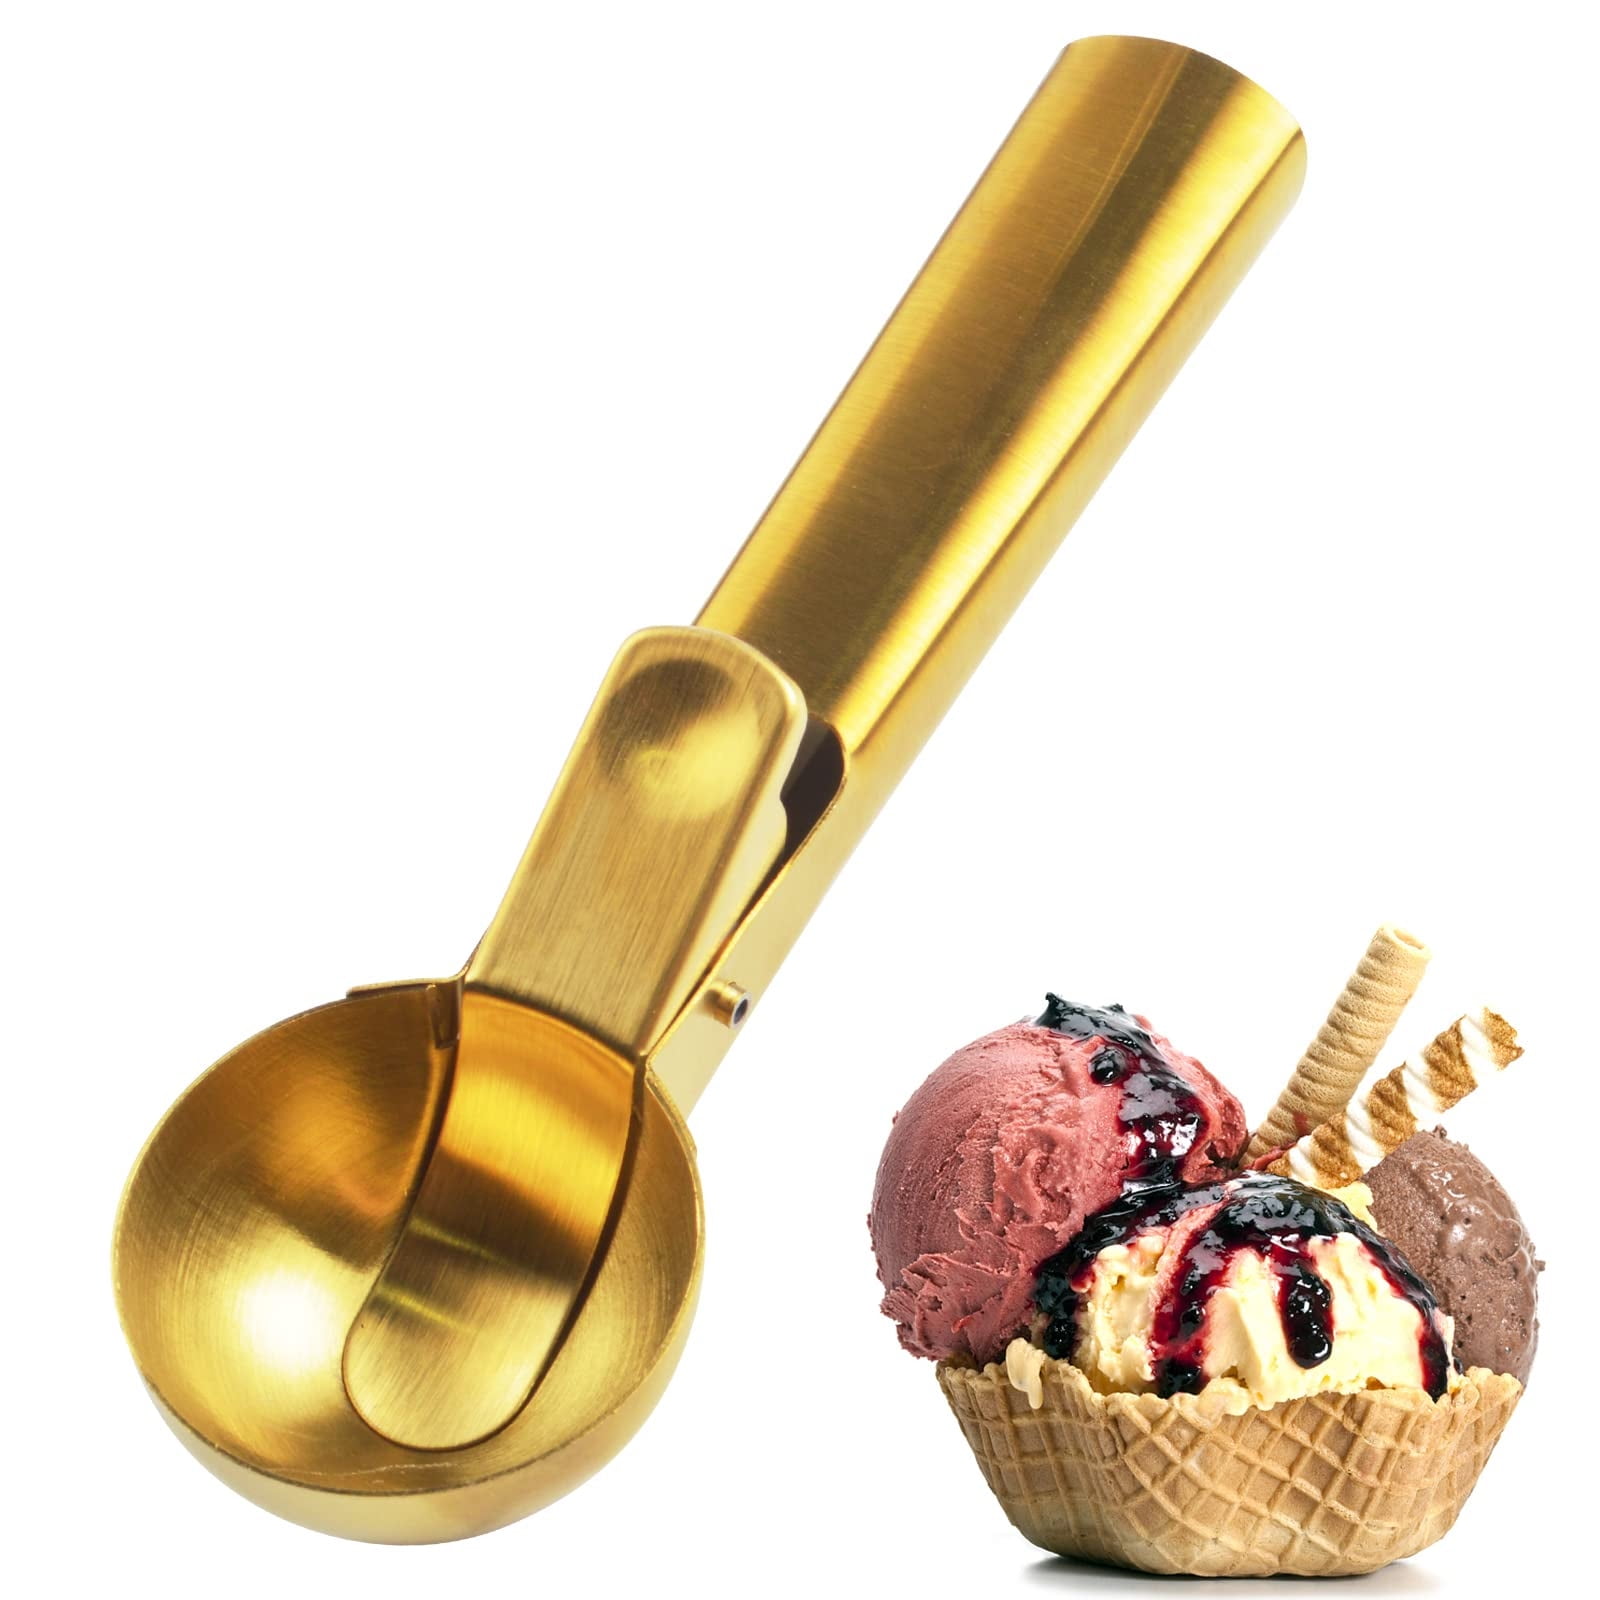 Ice Cream Scoop, Dish Washer Safe Ice Cream Spoon For Hard Ice Cream With A  Comfortable Grip Handle, Sturdy And Durable Design(1pcs)